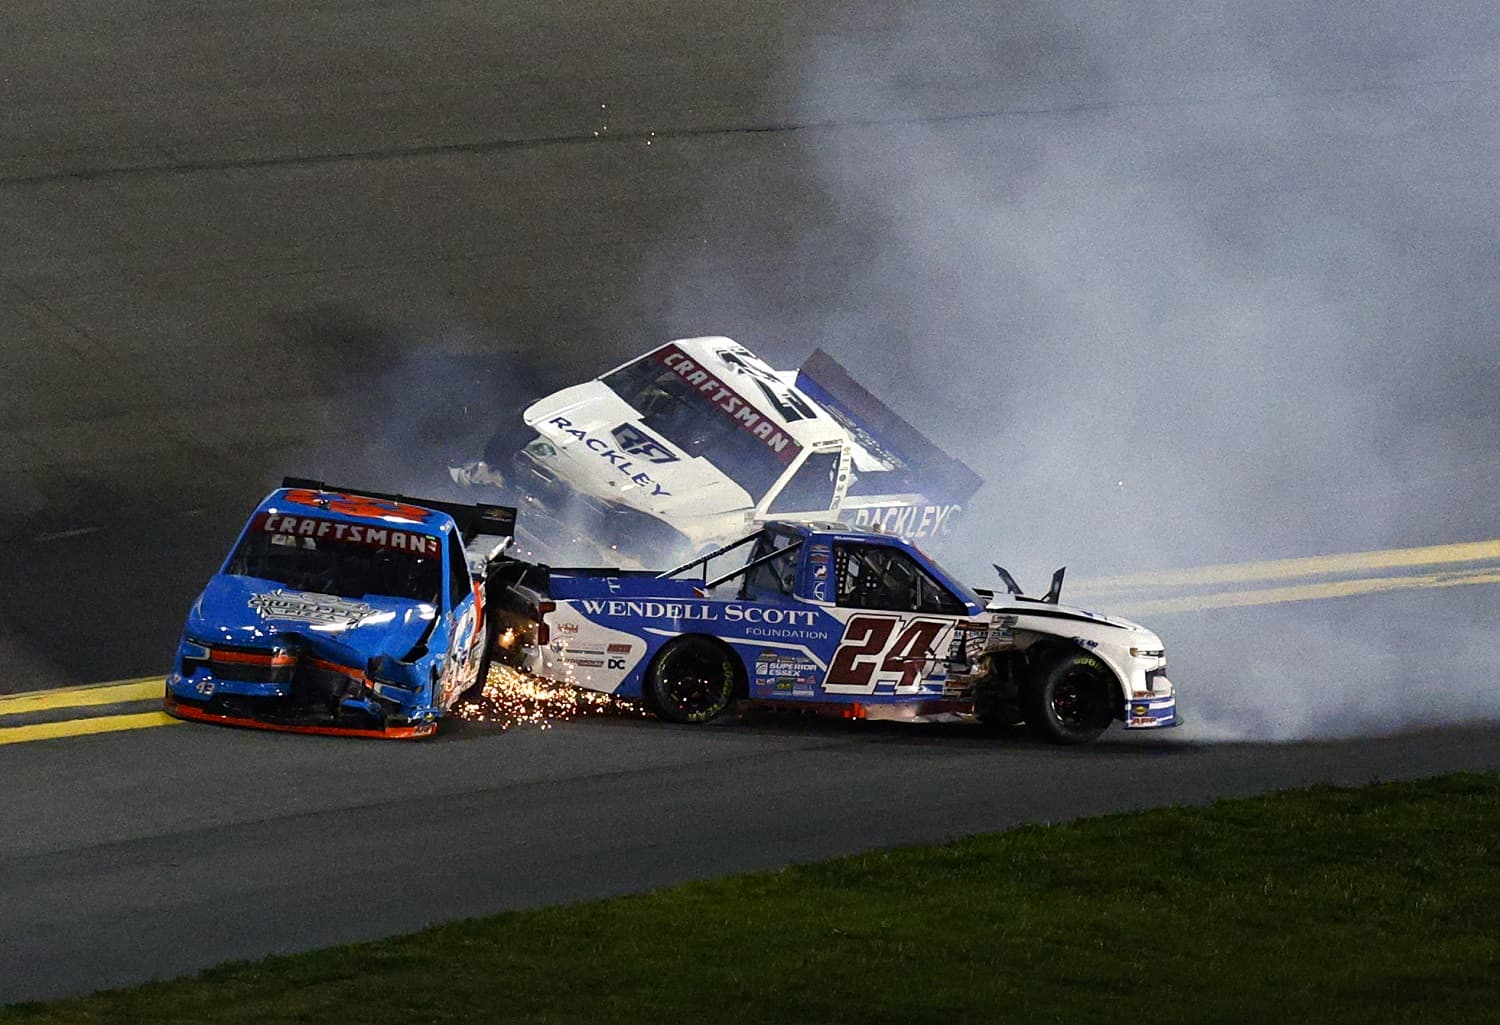 Rajah Caruth. Daniel Dye and Matt DiBenedetto spin after an on-track incident during the NASCAR Craftsman Truck Series NextEra Energy 250 at Daytona International Speedway on Feb. 17, 2023.